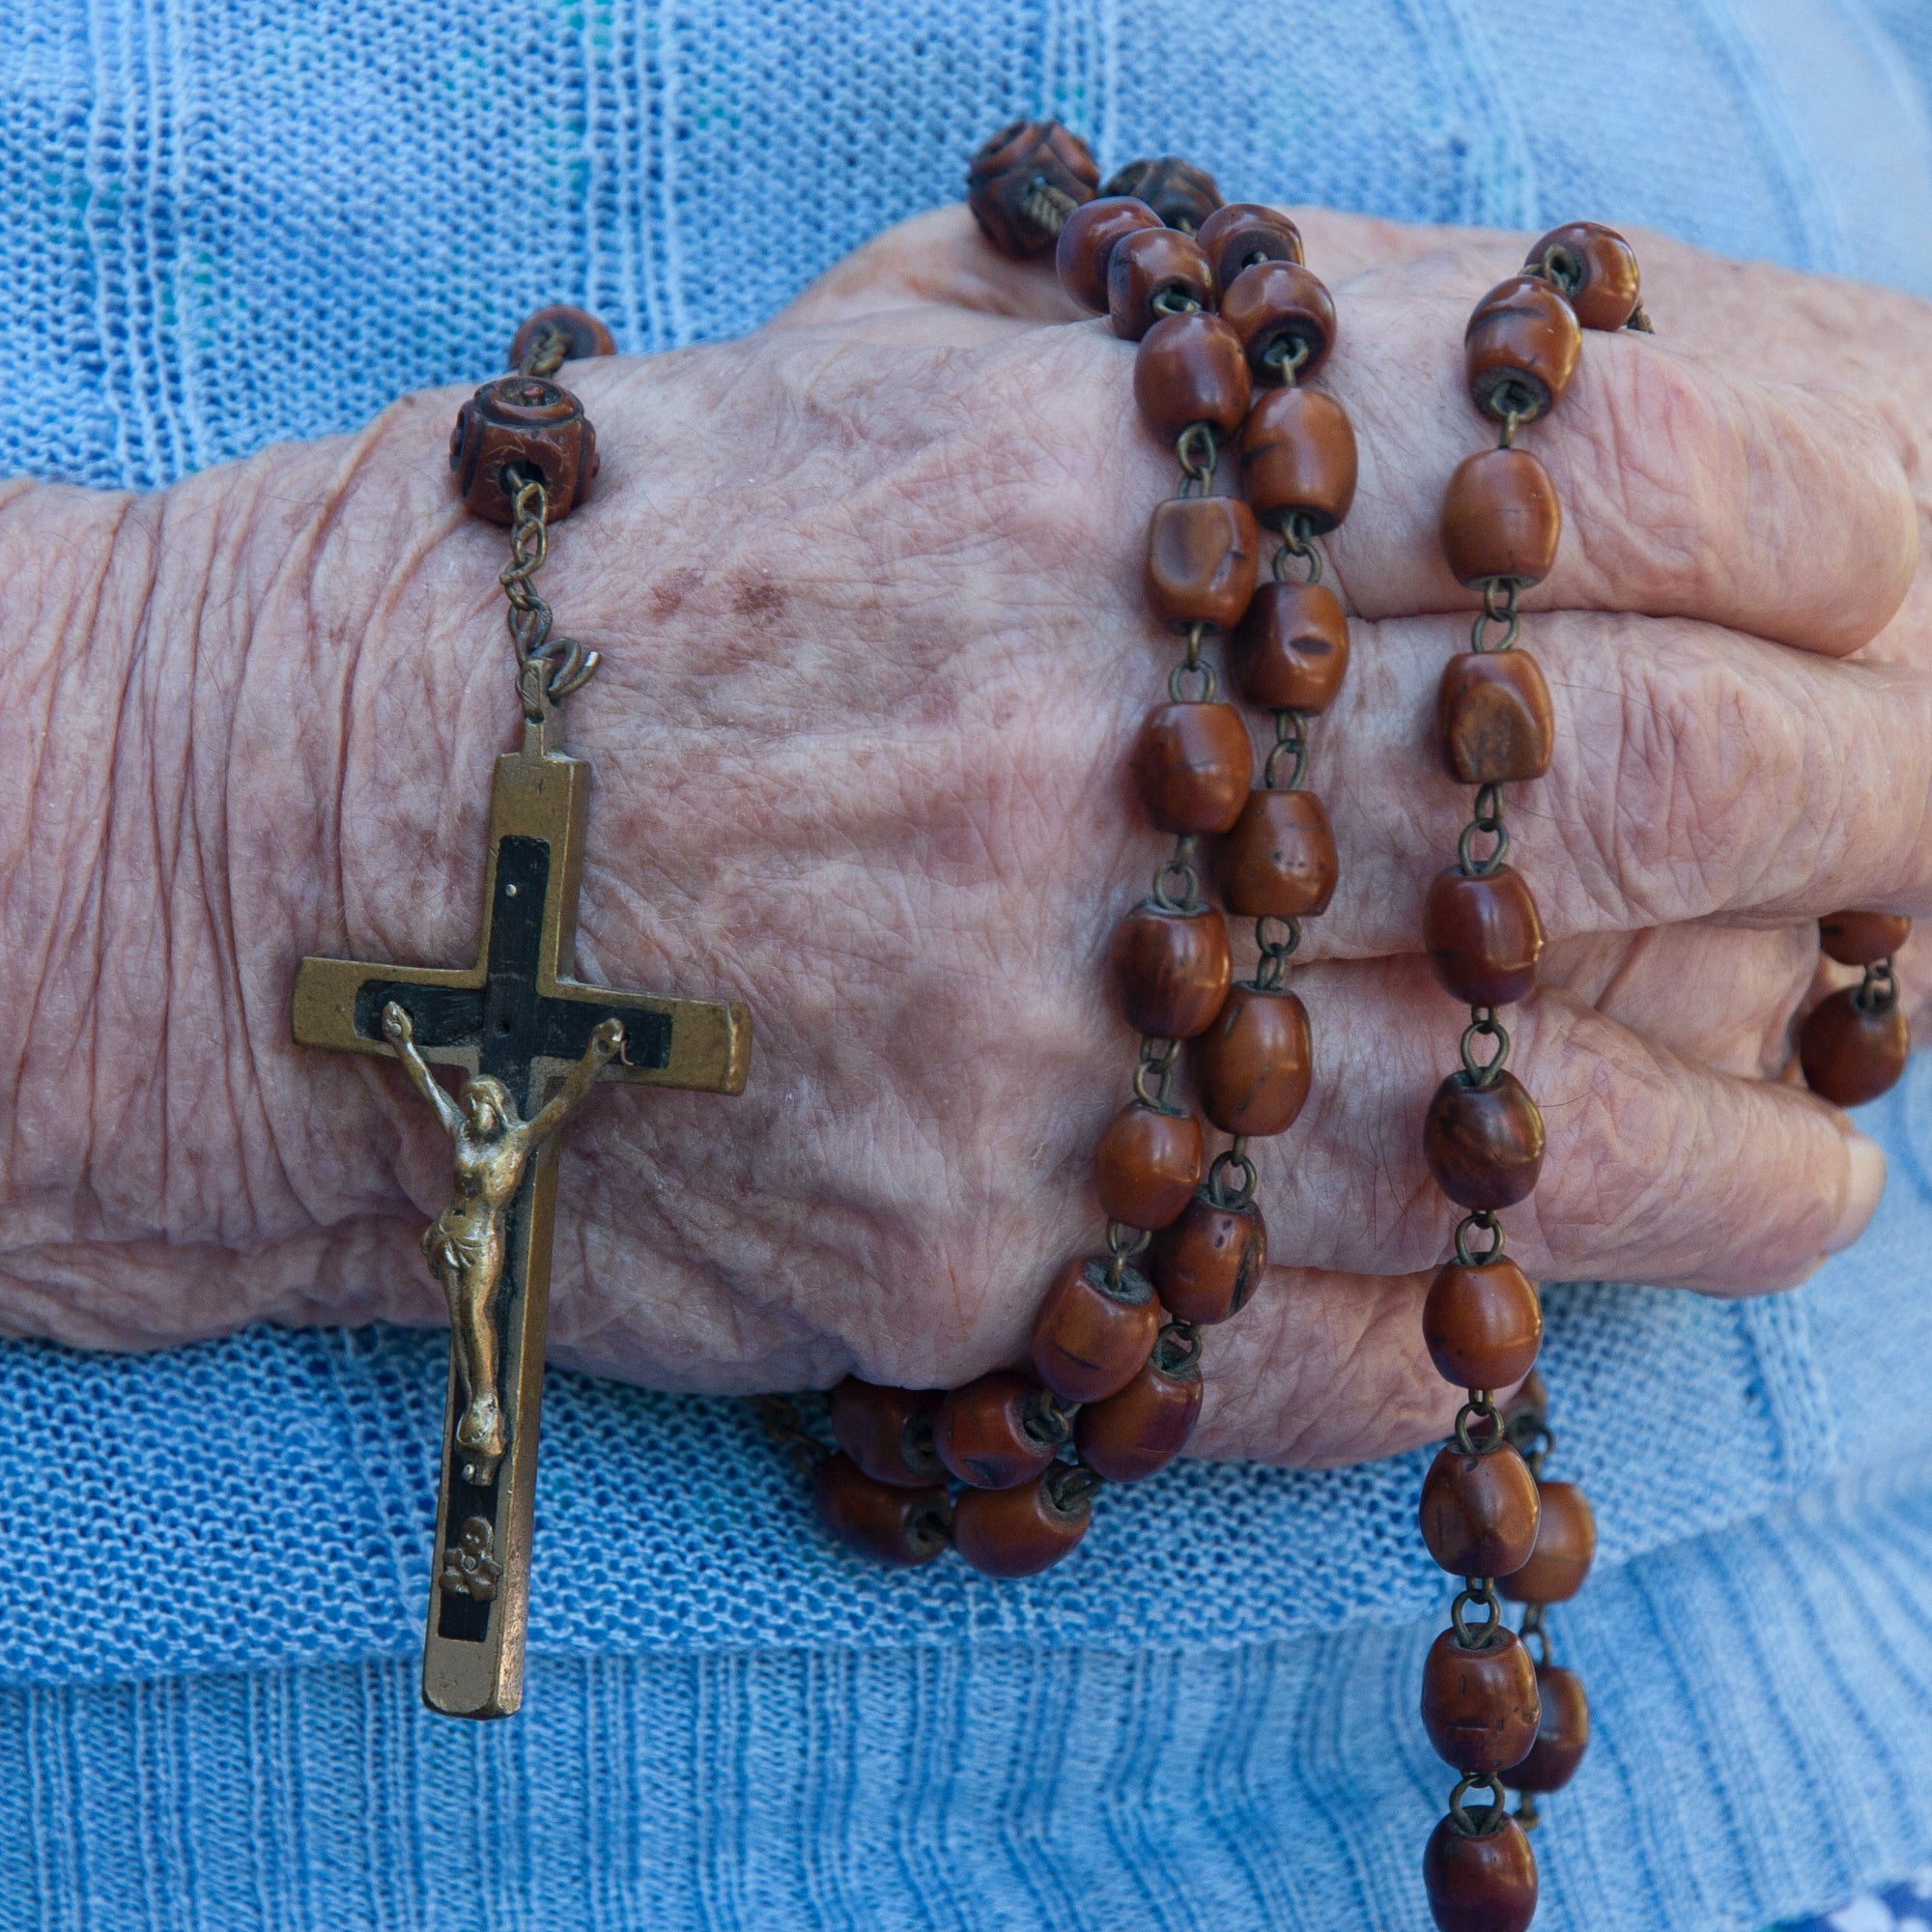 How to Pray the Rosary